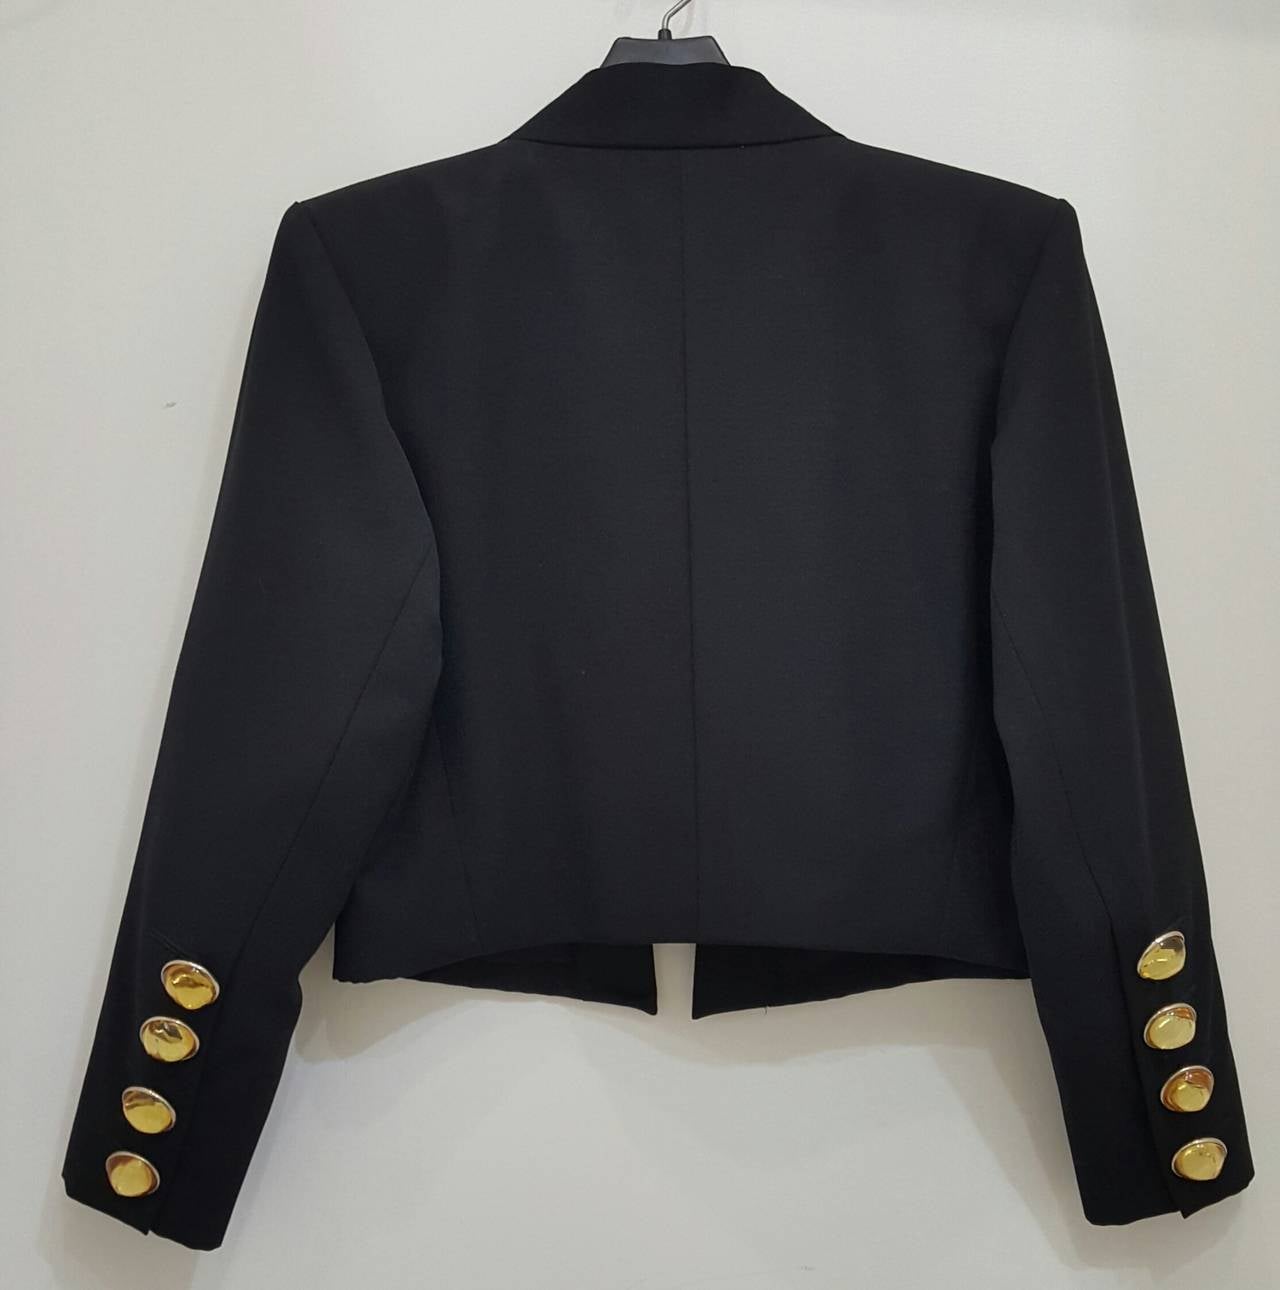 Vintage YSL Tuxedo Bolero Jacket From The Rive Gauche Collection.  Size 46 1